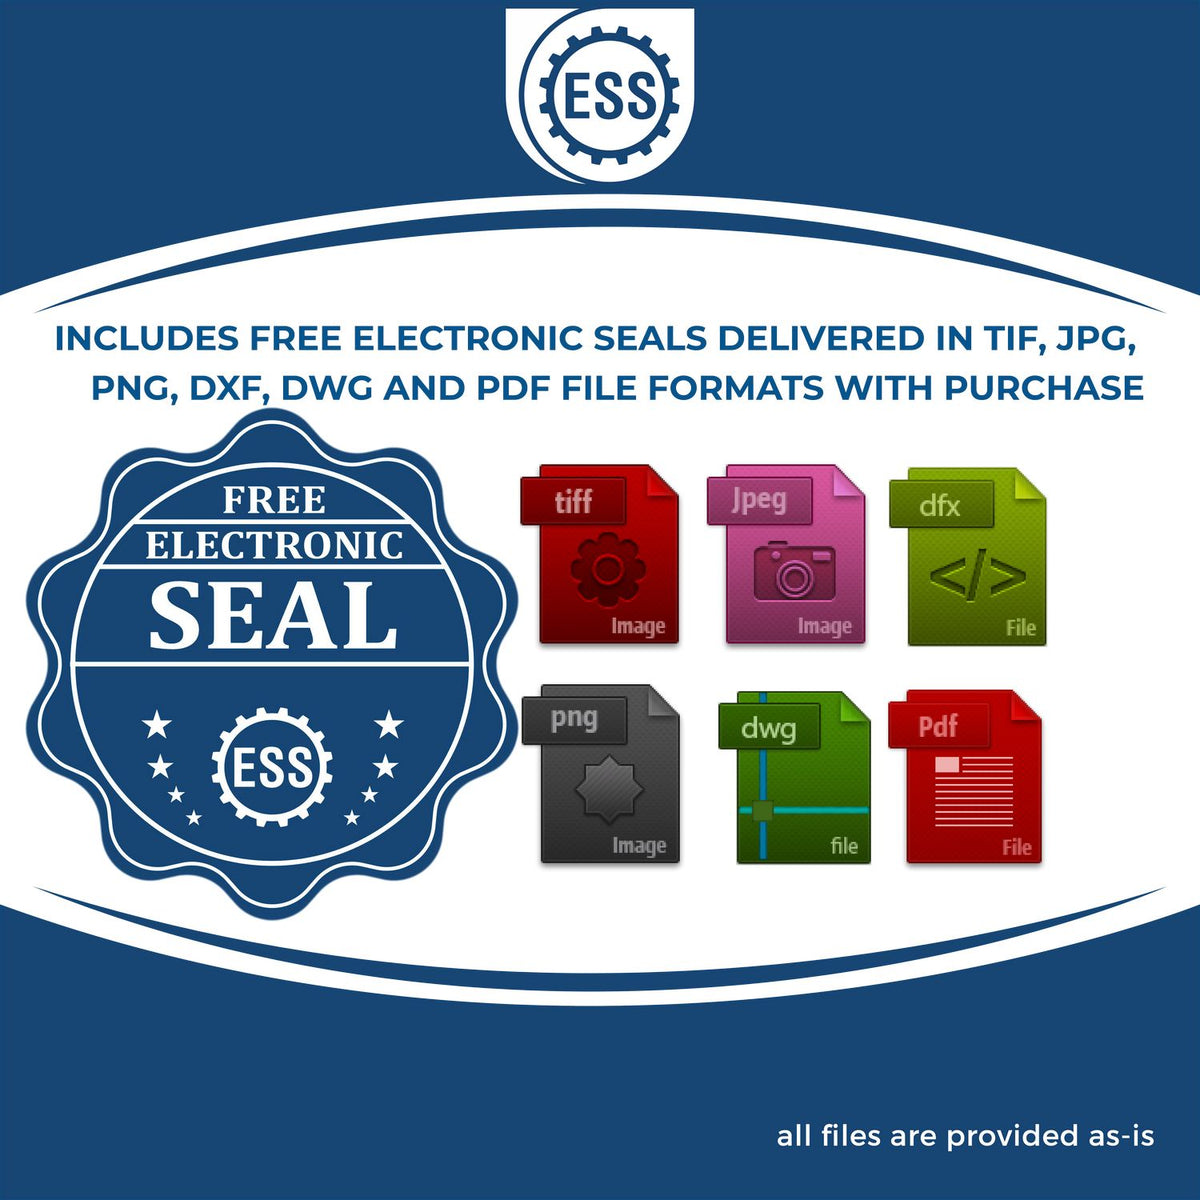 An infographic for the free electronic seal for the Long Reach Oklahoma PE Seal illustrating the different file type icons such as DXF, DWG, TIF, JPG and PNG.